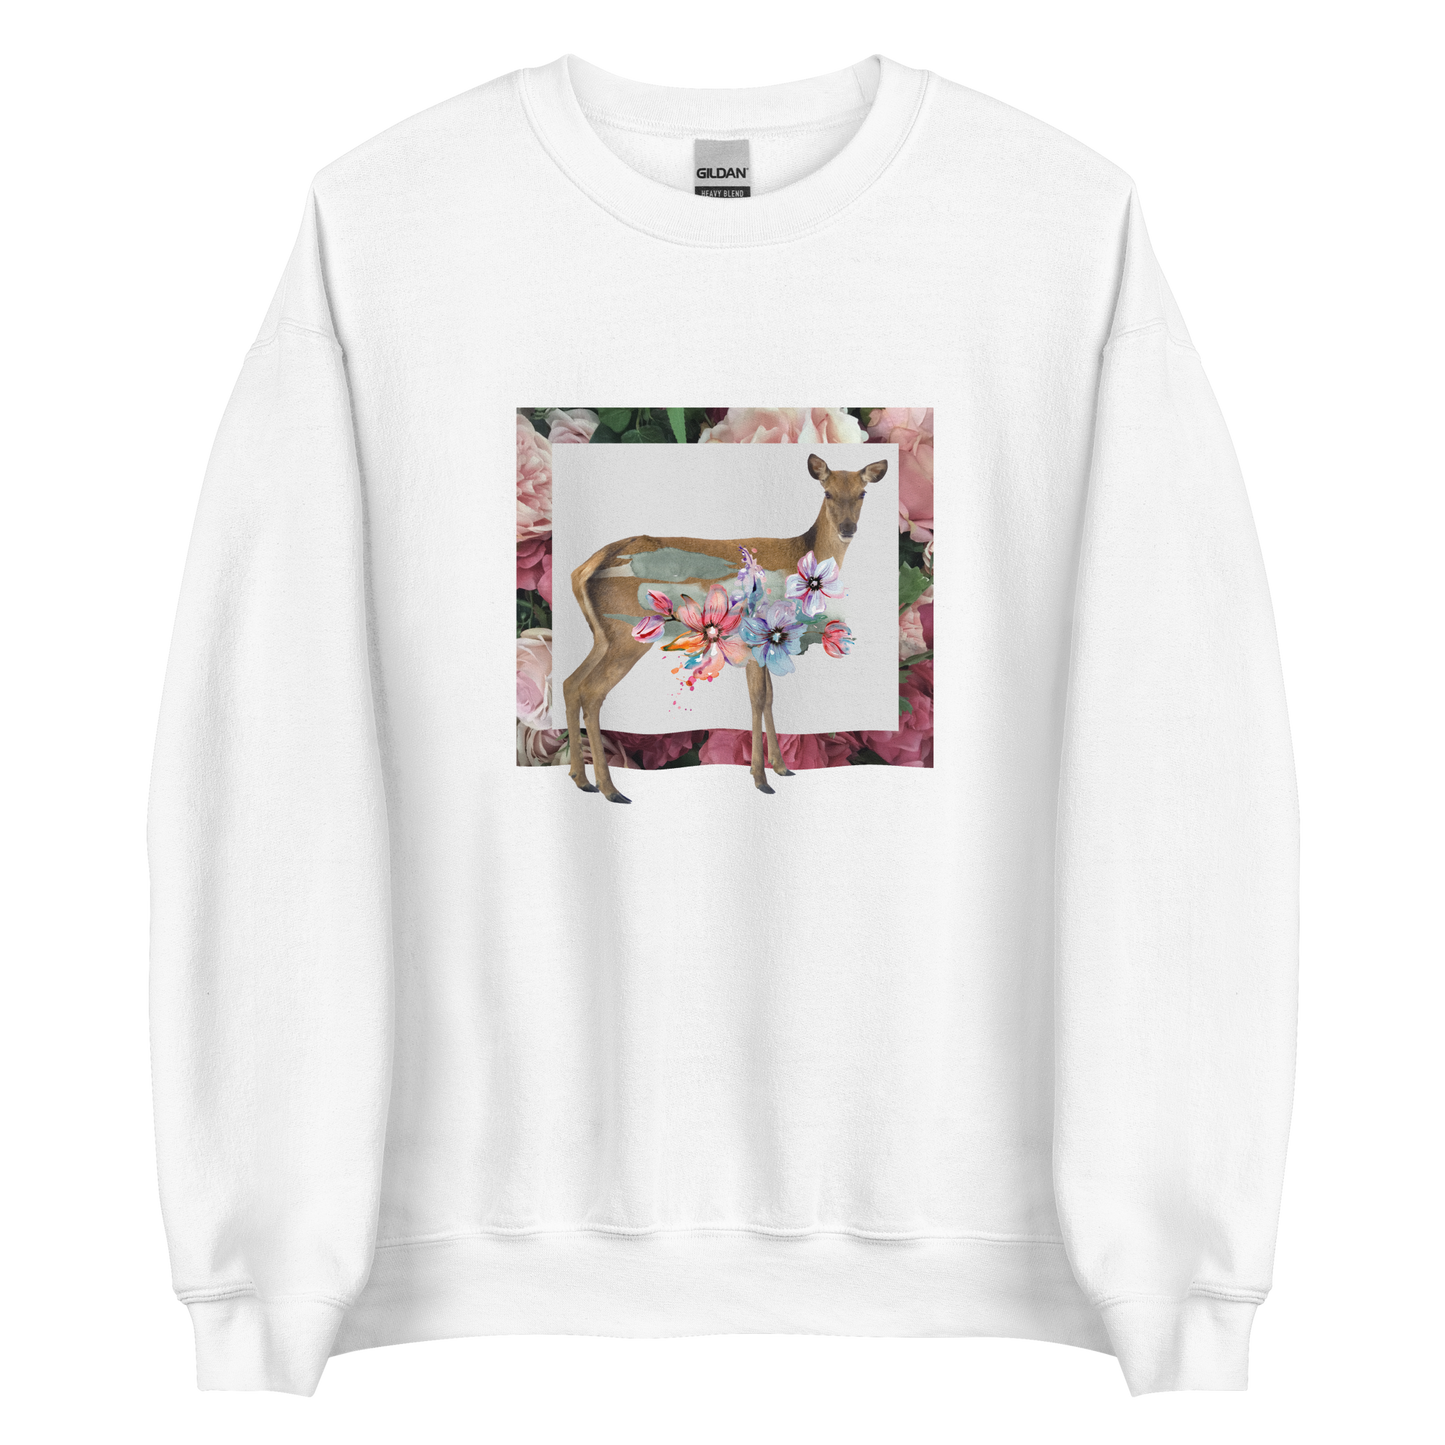 White Floral Deer Sweatshirt featuring a beautifully detailed vibrant Floral Deer graphic on the chest - Cute Graphic Deer Sweatshirts - Boozy Fox